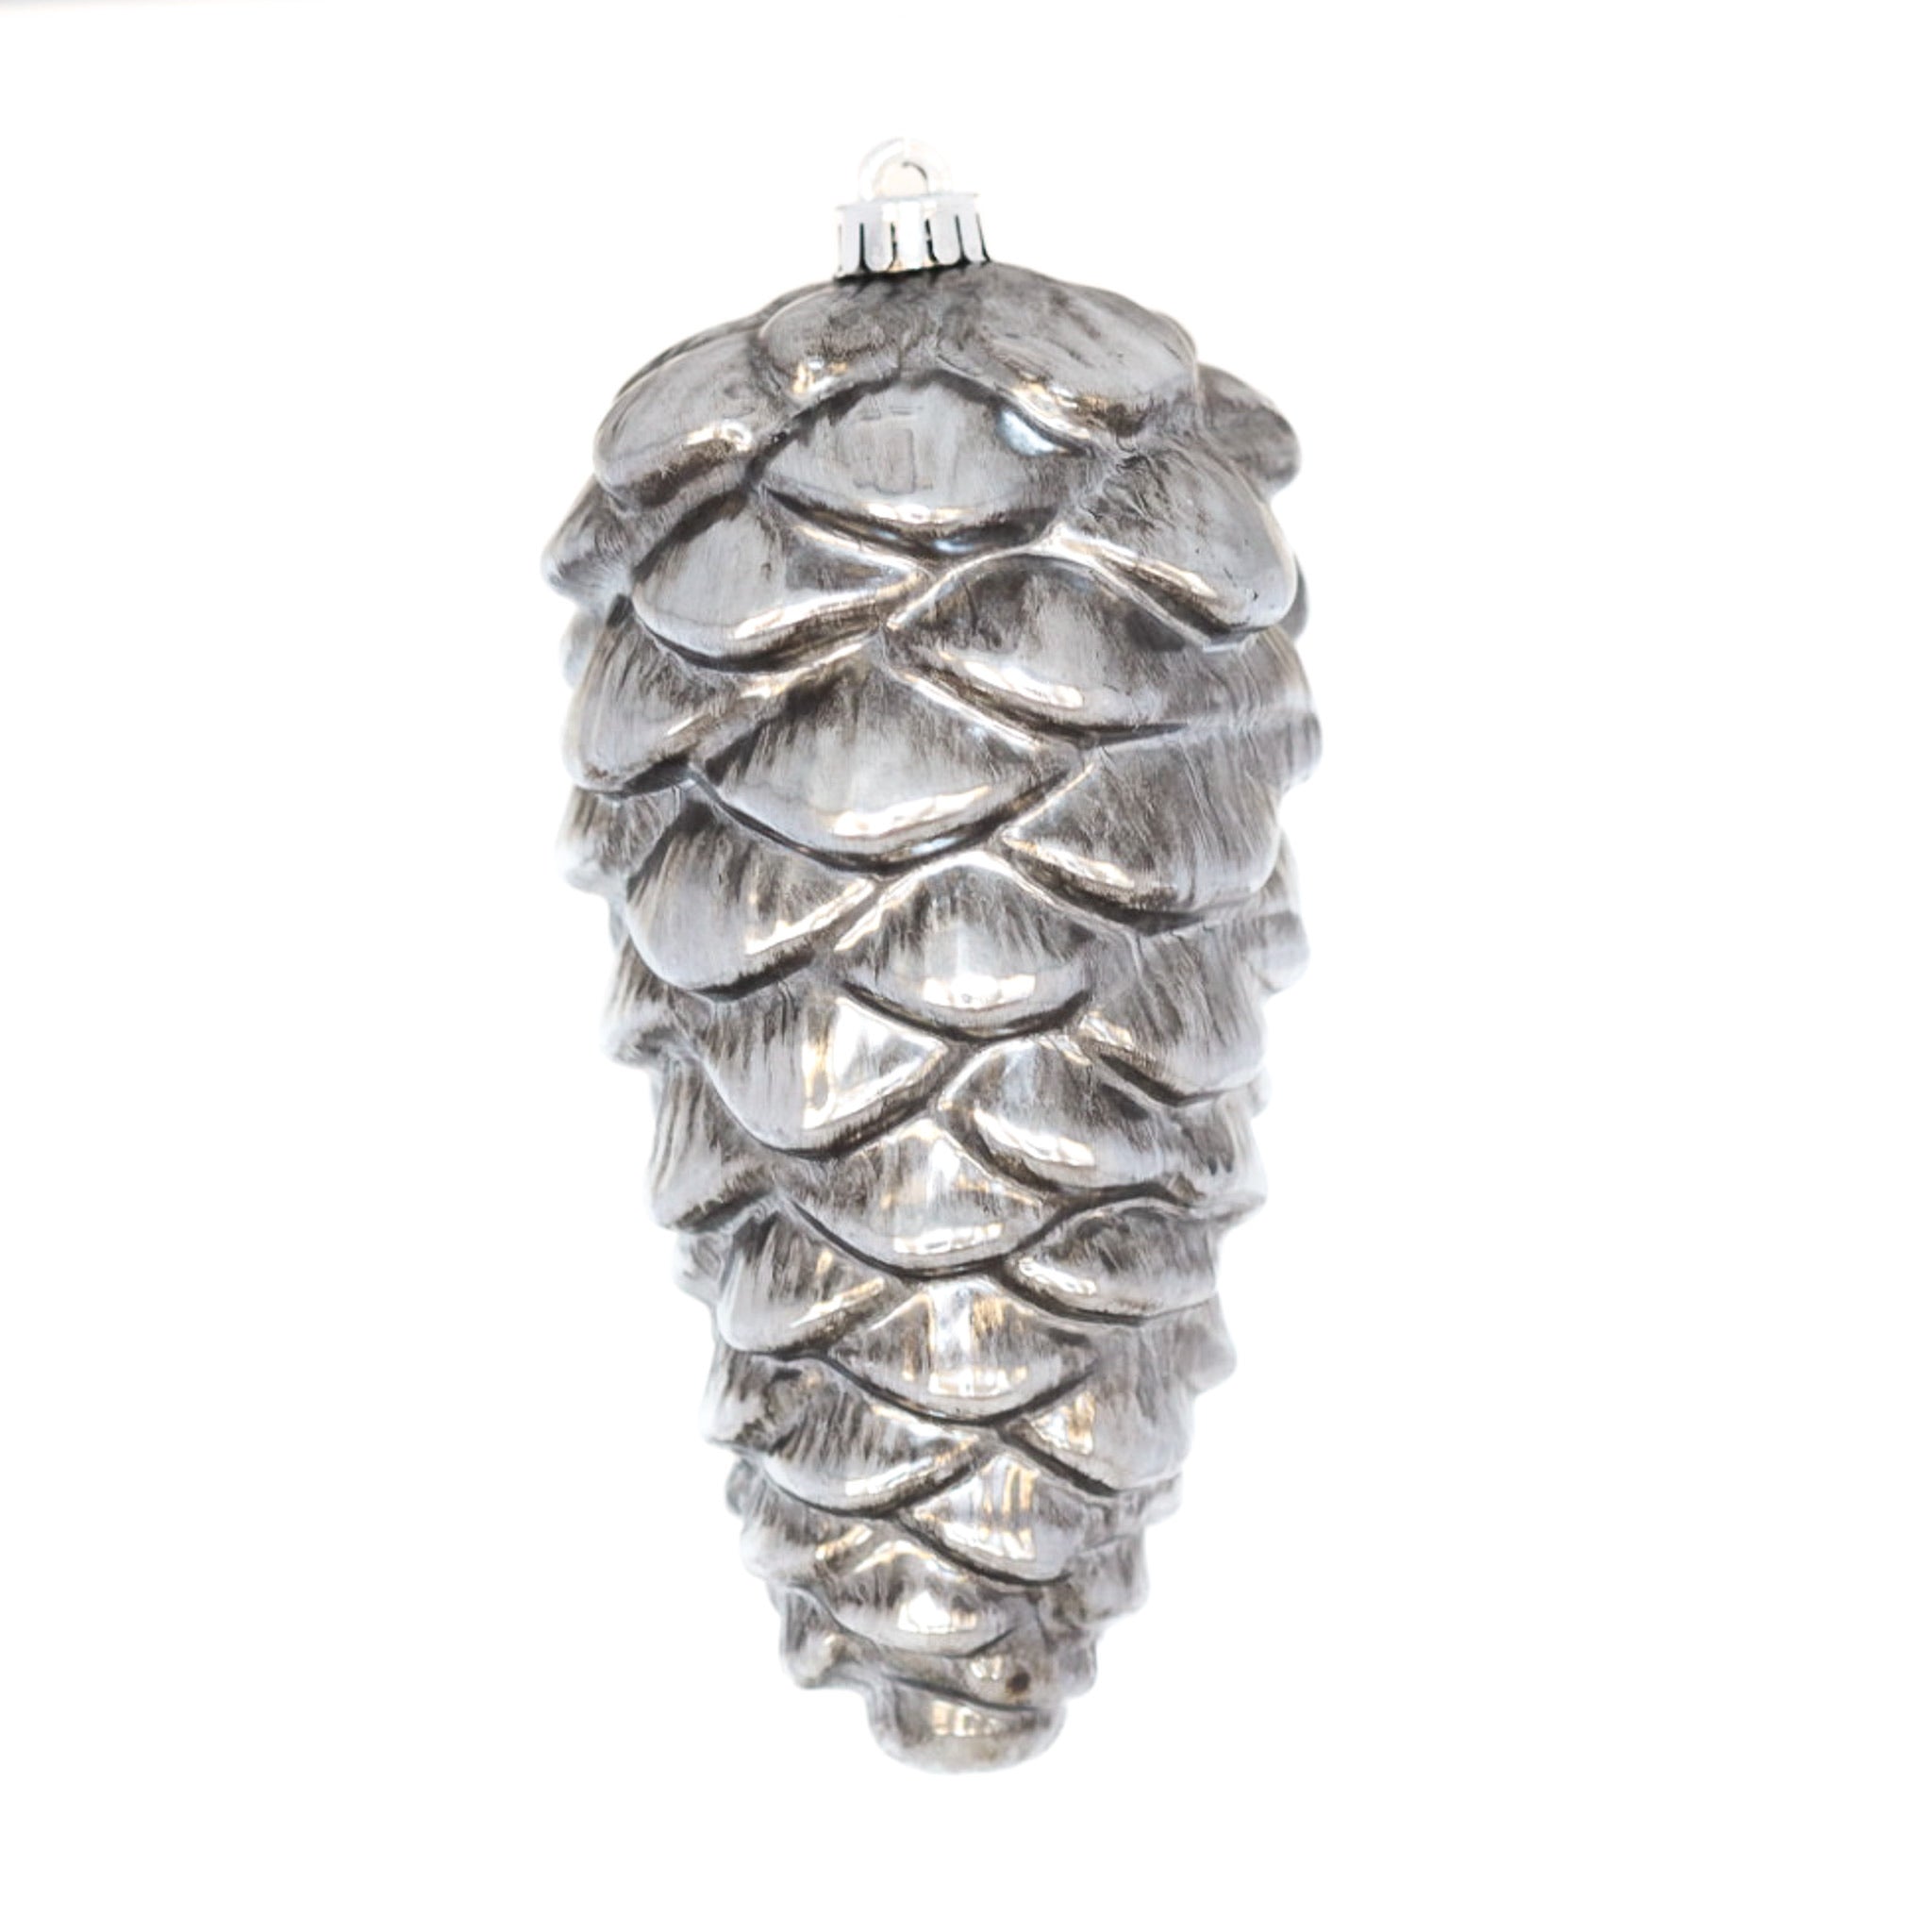 Gold Pinecone Ornament - Available in Three Colors